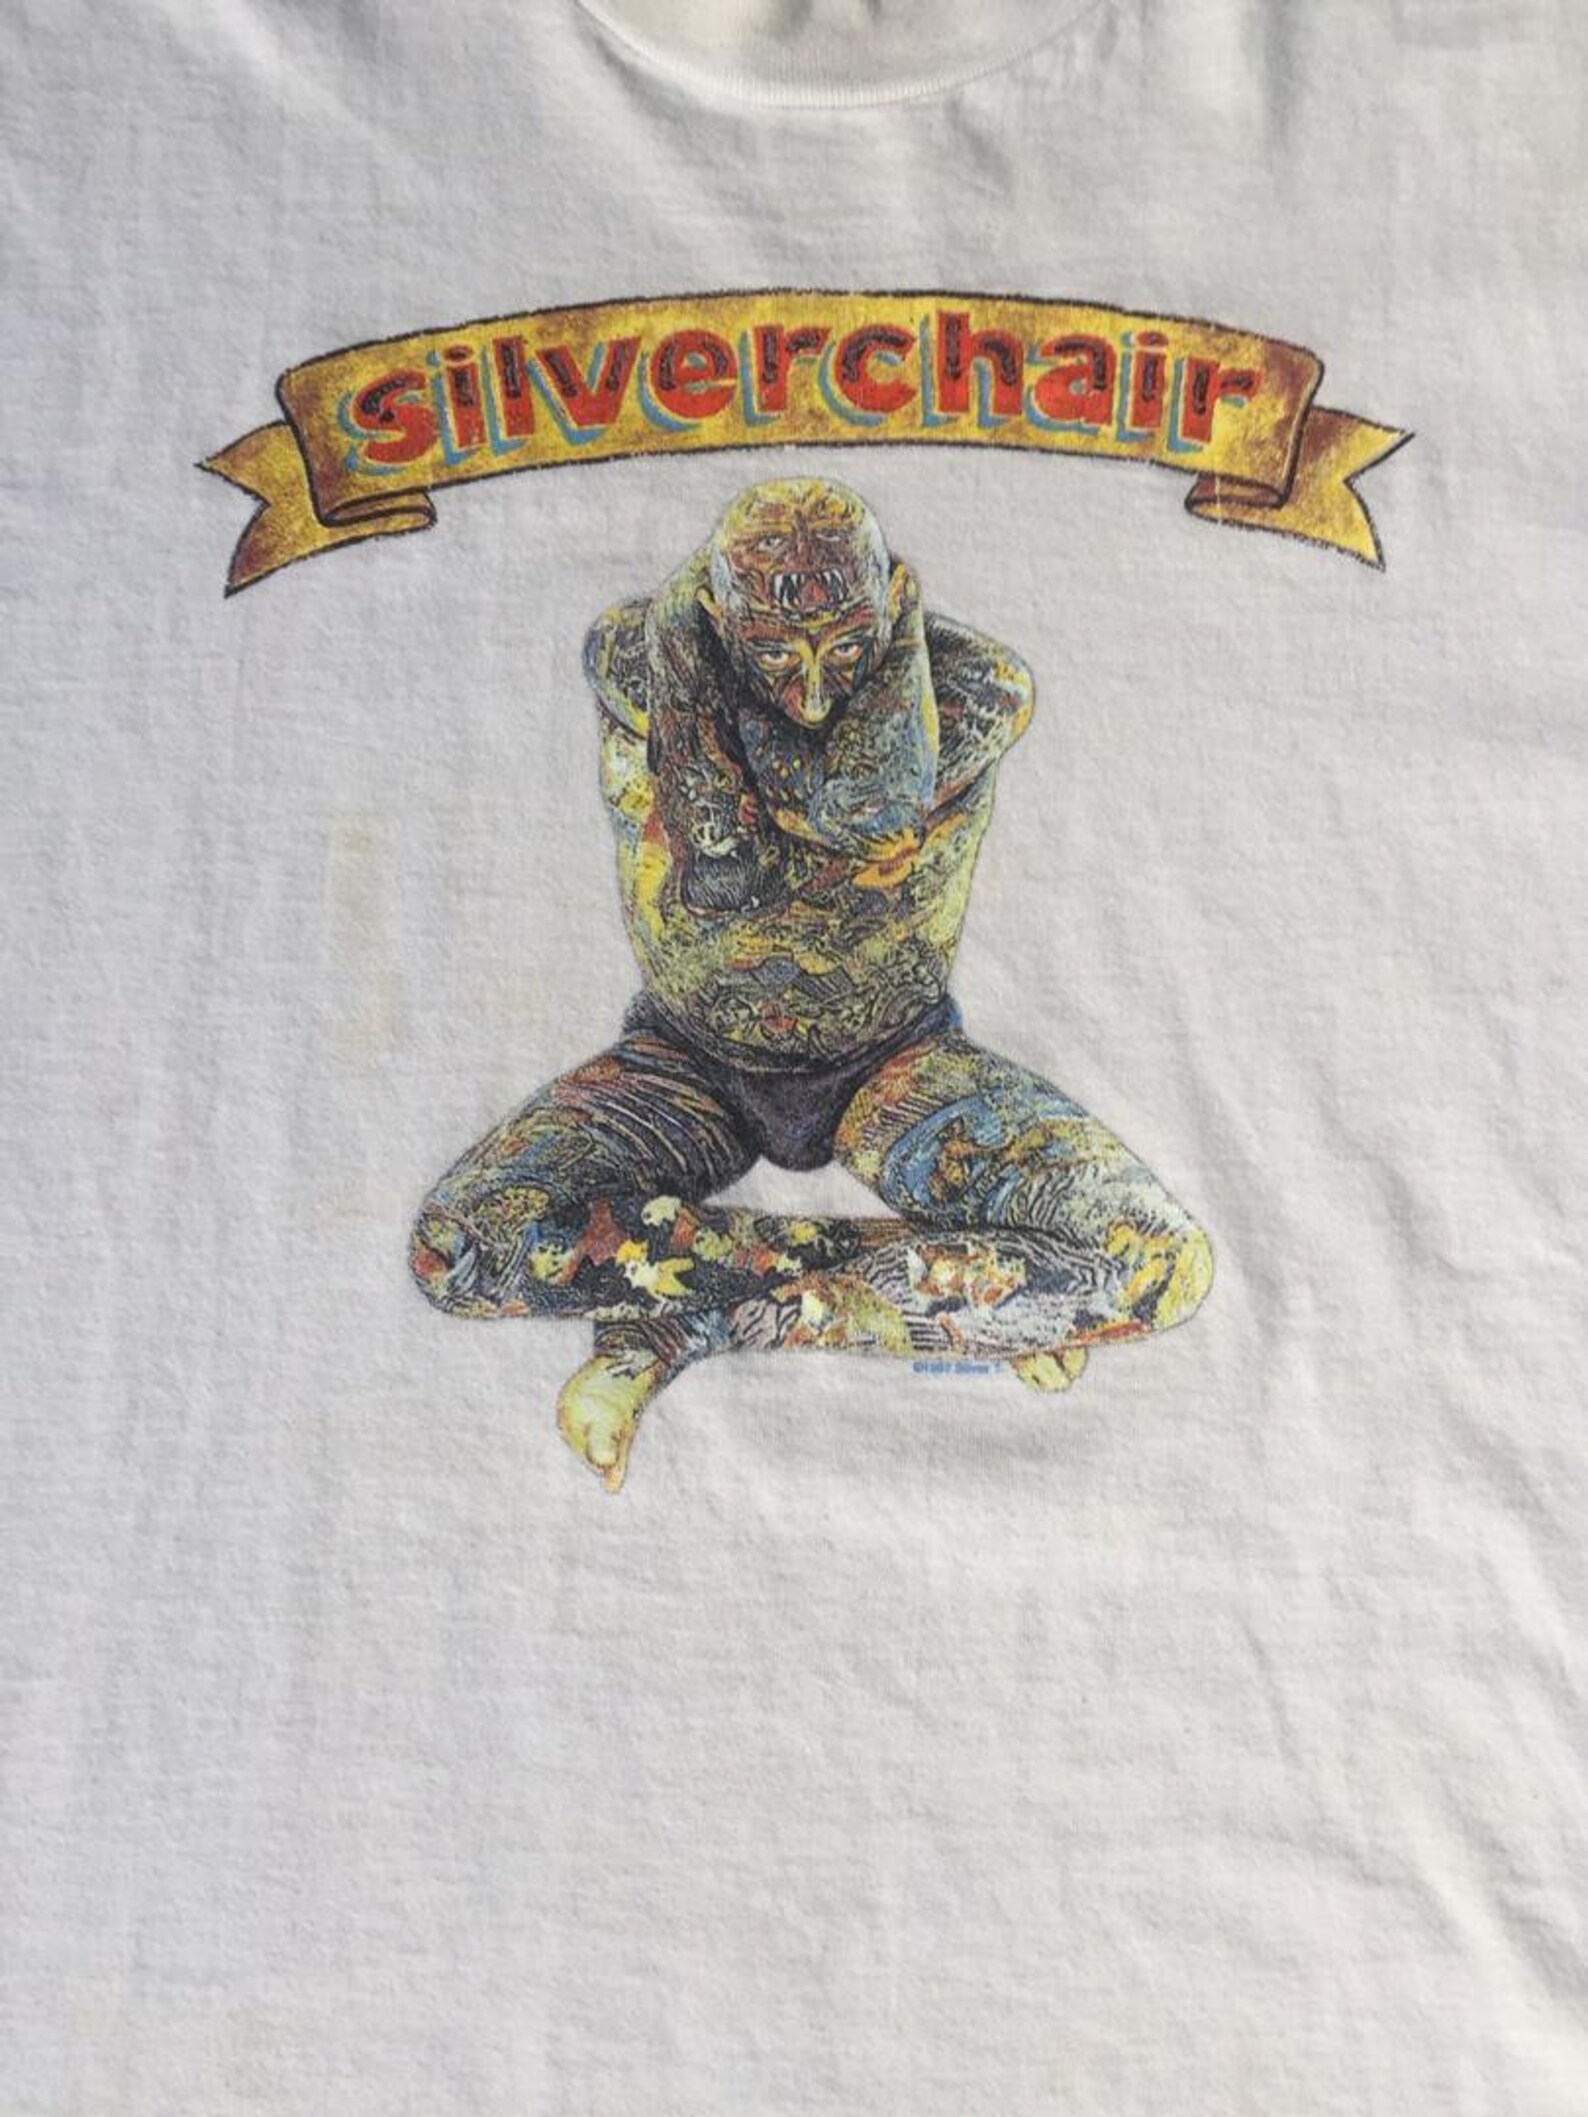 Vintage 90s Silverchair Band T-Shirt /Size XL / 90s | Etsy